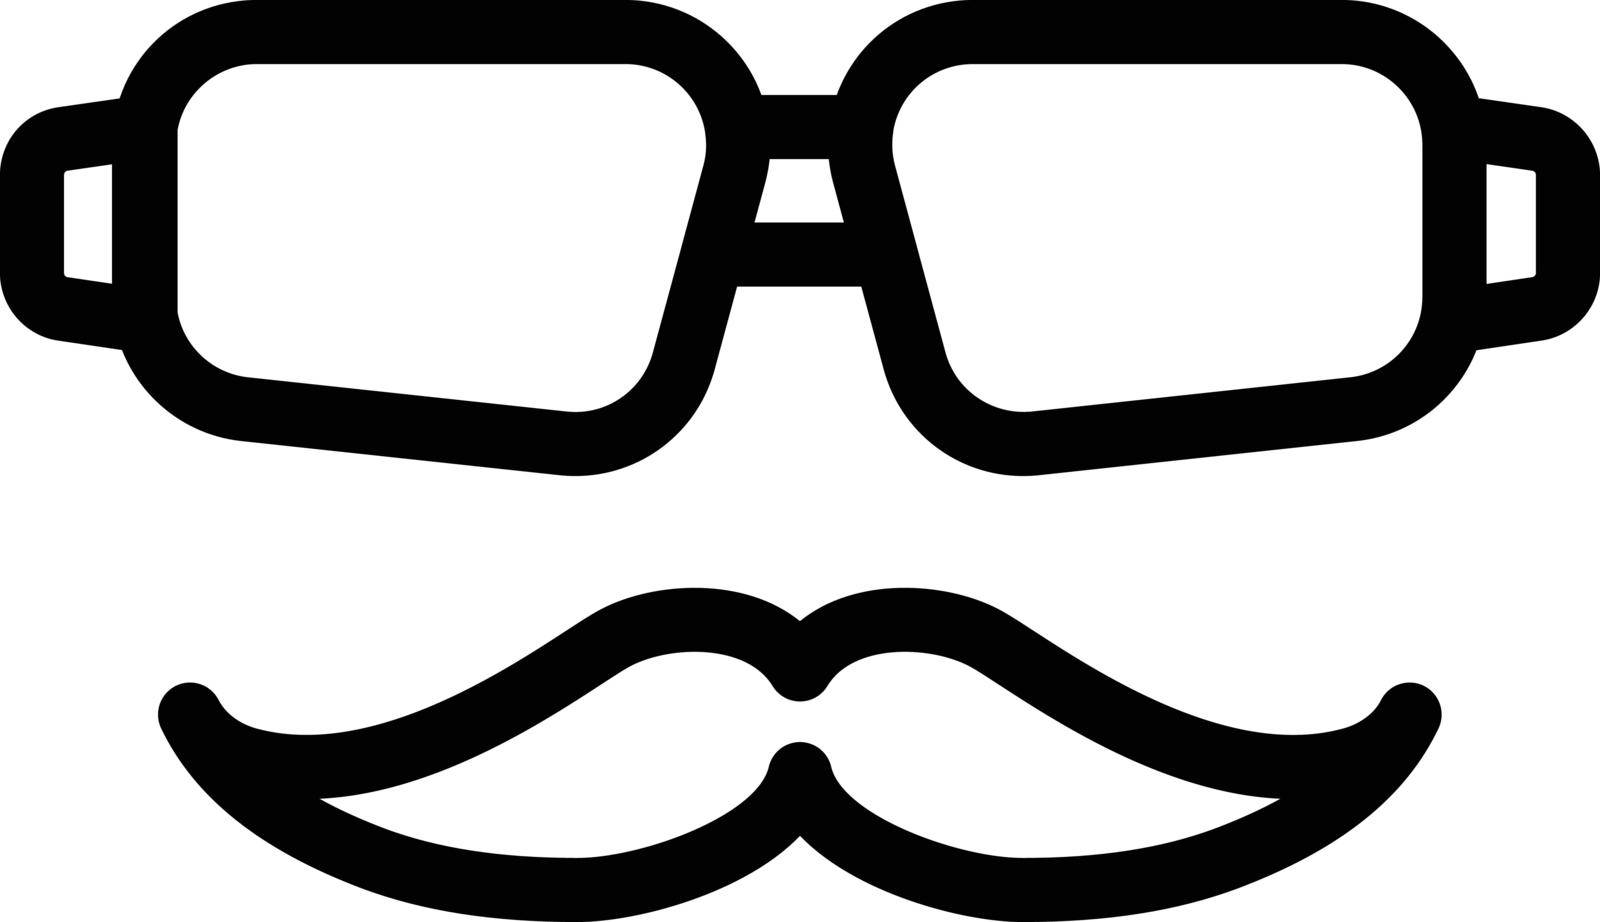 mustache vector illustration isolated on a transparent background . colour vector icons for concept or web graphics.